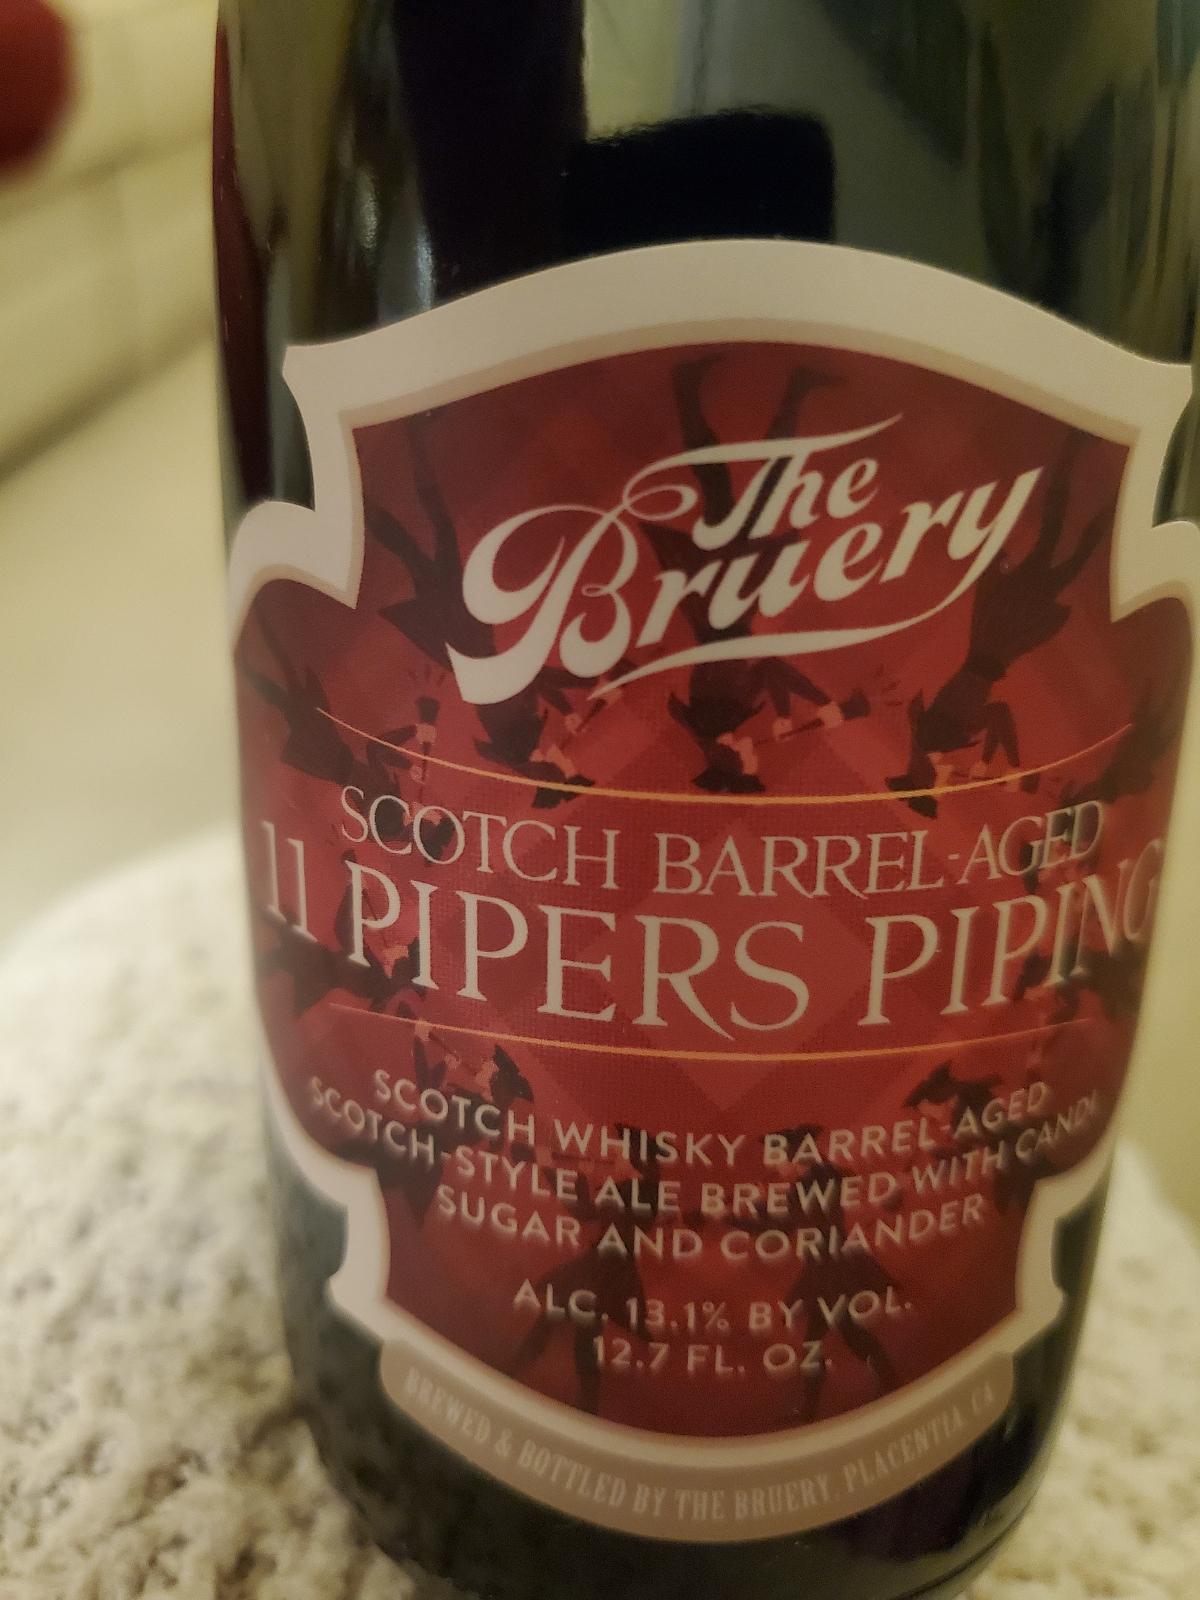 11 Pipers Piping (Barrel Aged)